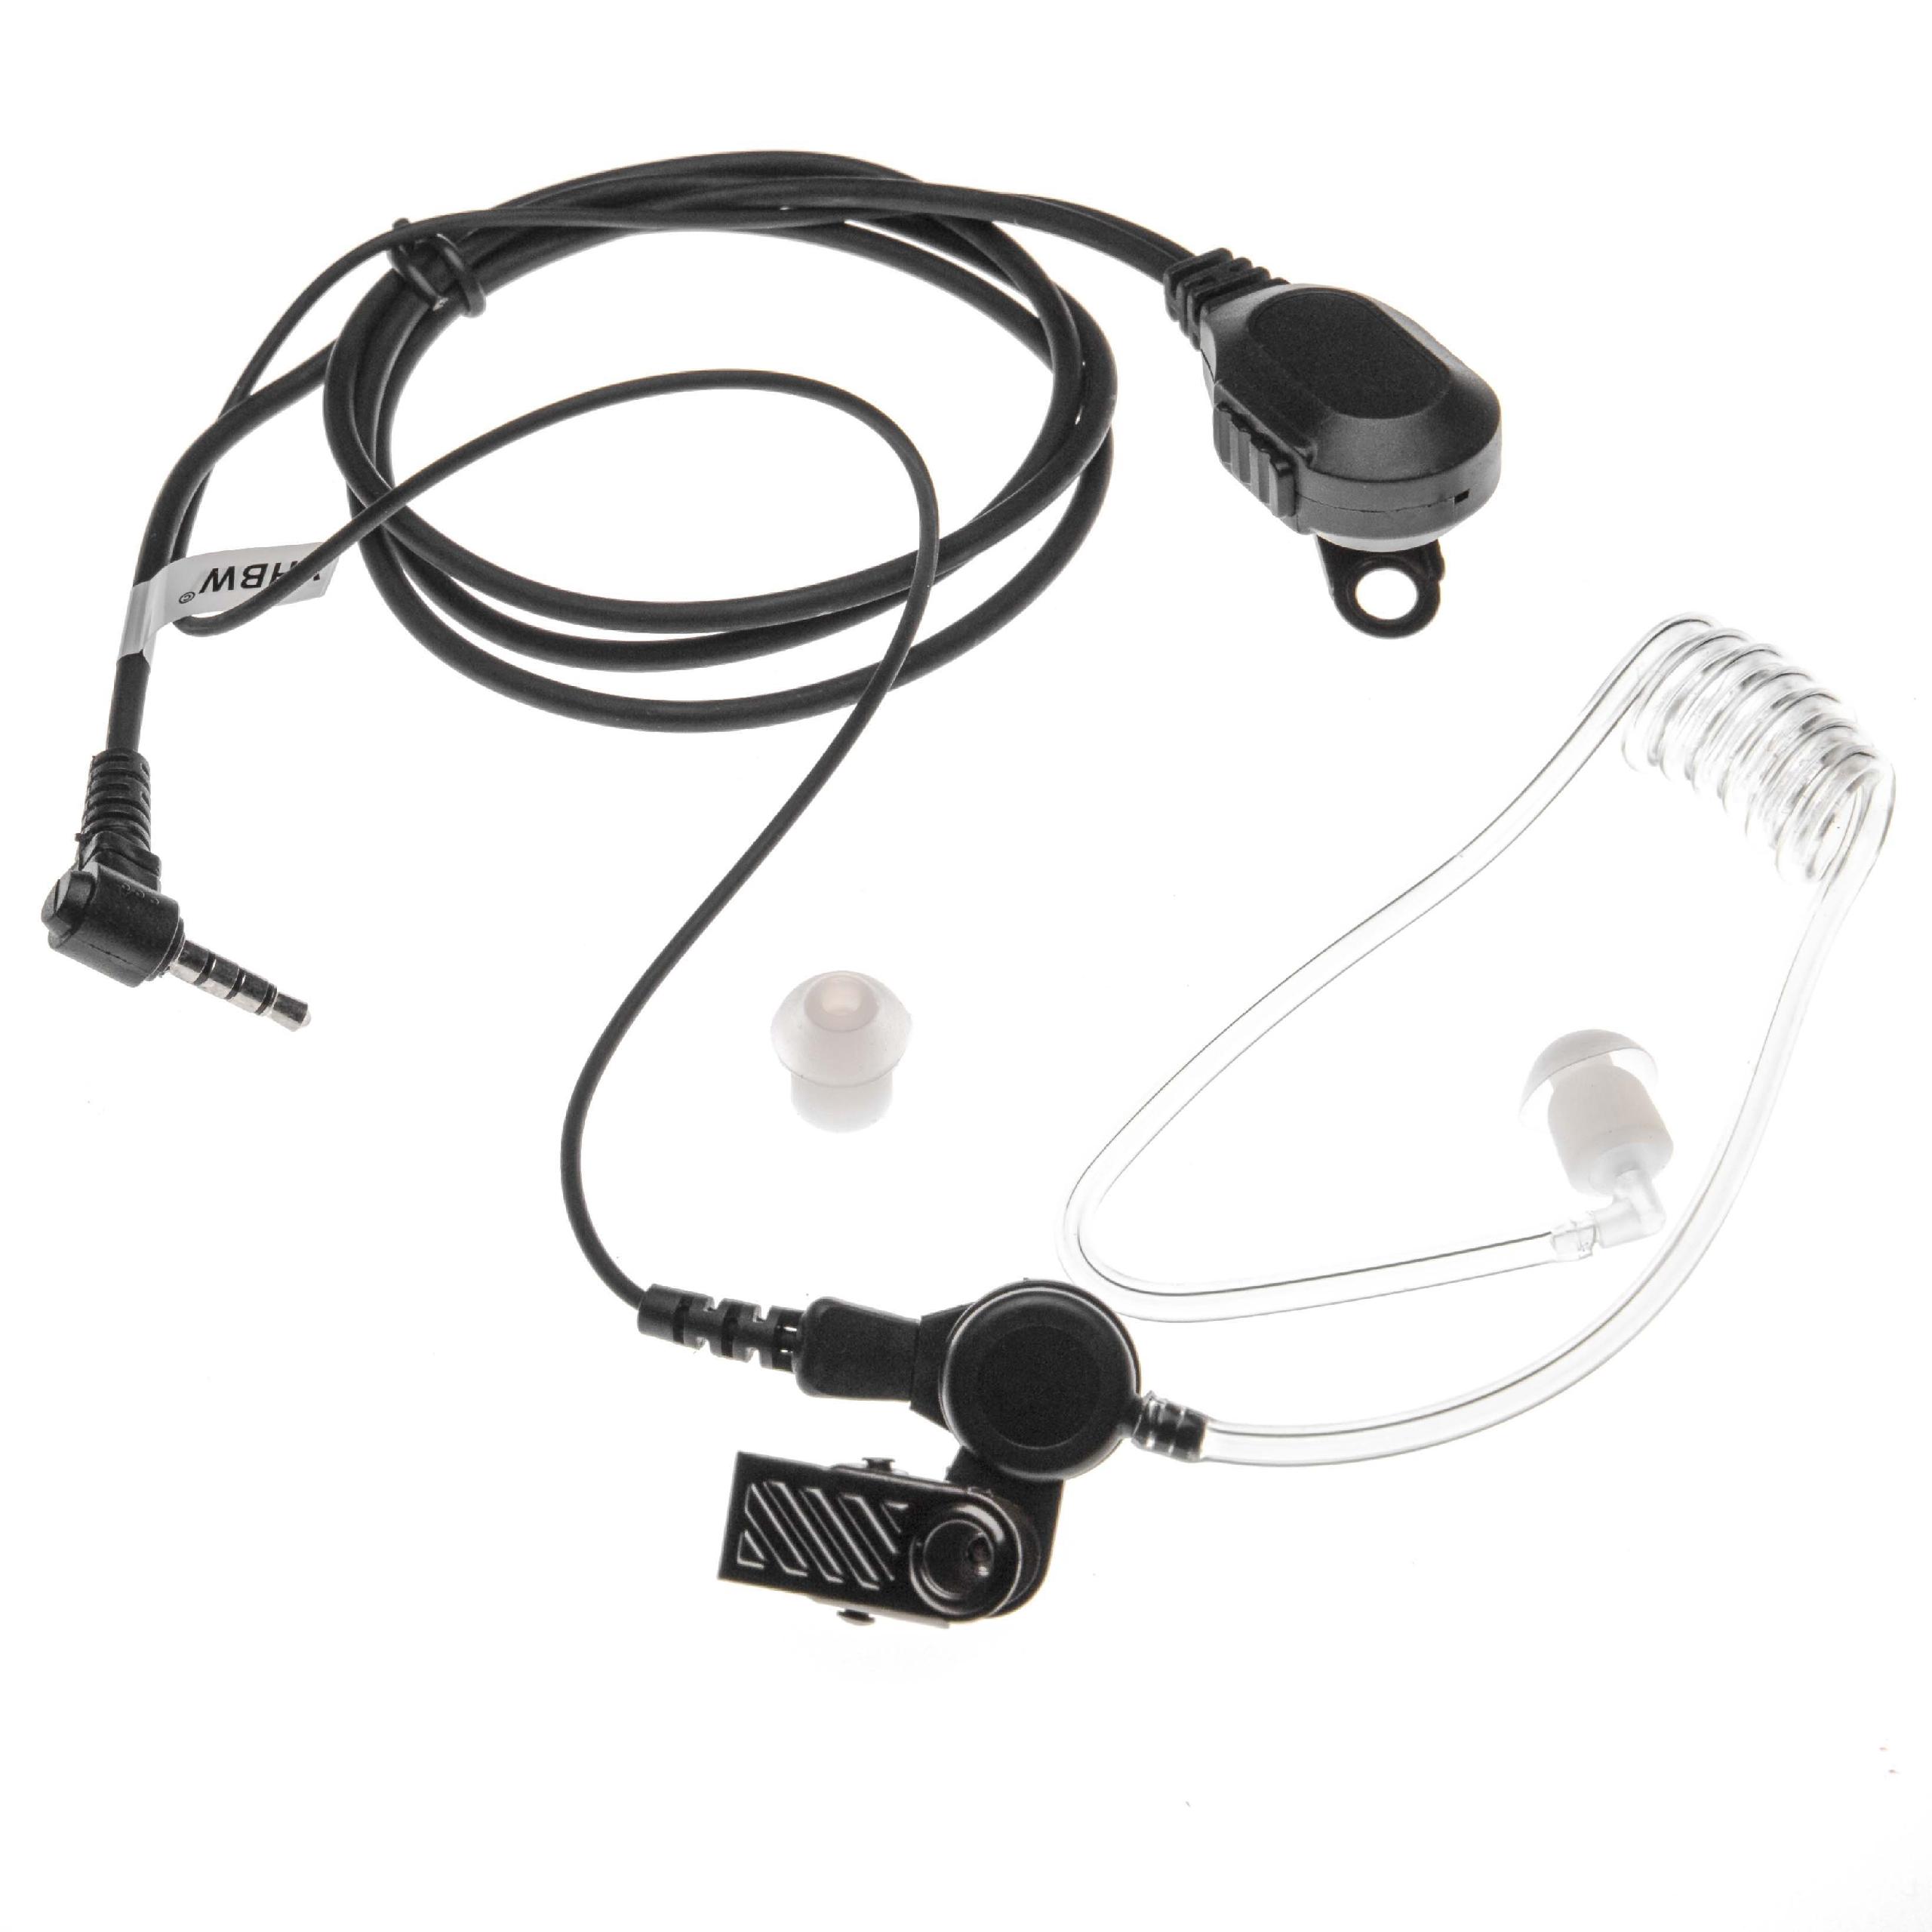 Security Radio Headset suitable for Yaesu VX-2R - with PTT Microphone + Clip Mount + phonowire